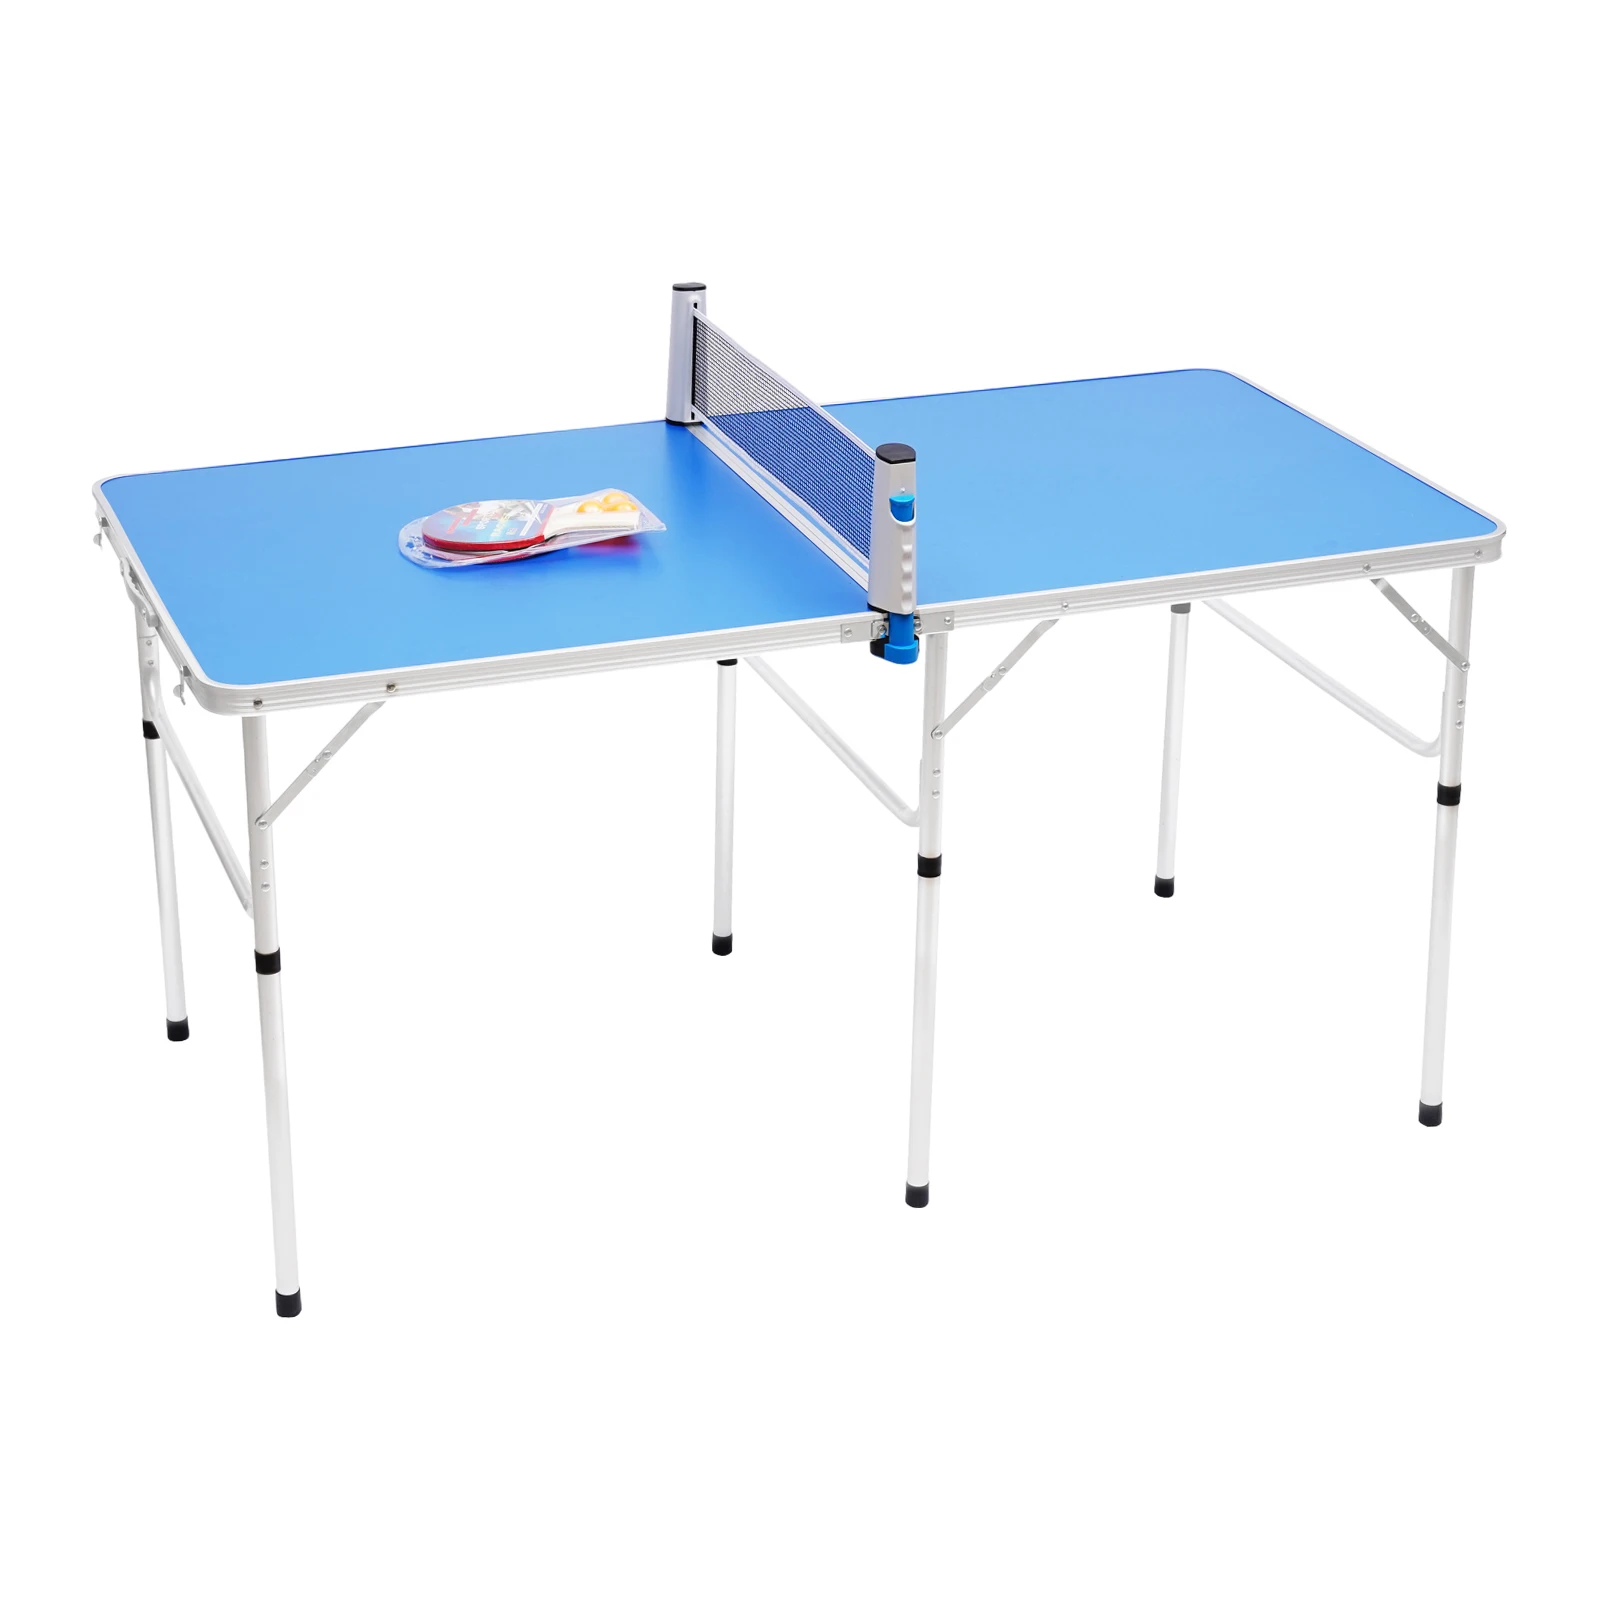 Portable Table Tennis Table Foldable PingPong Table with Net 2 PingPong Paddles Mid-Size Table Tennis Game Set forIndoor/Outdoor